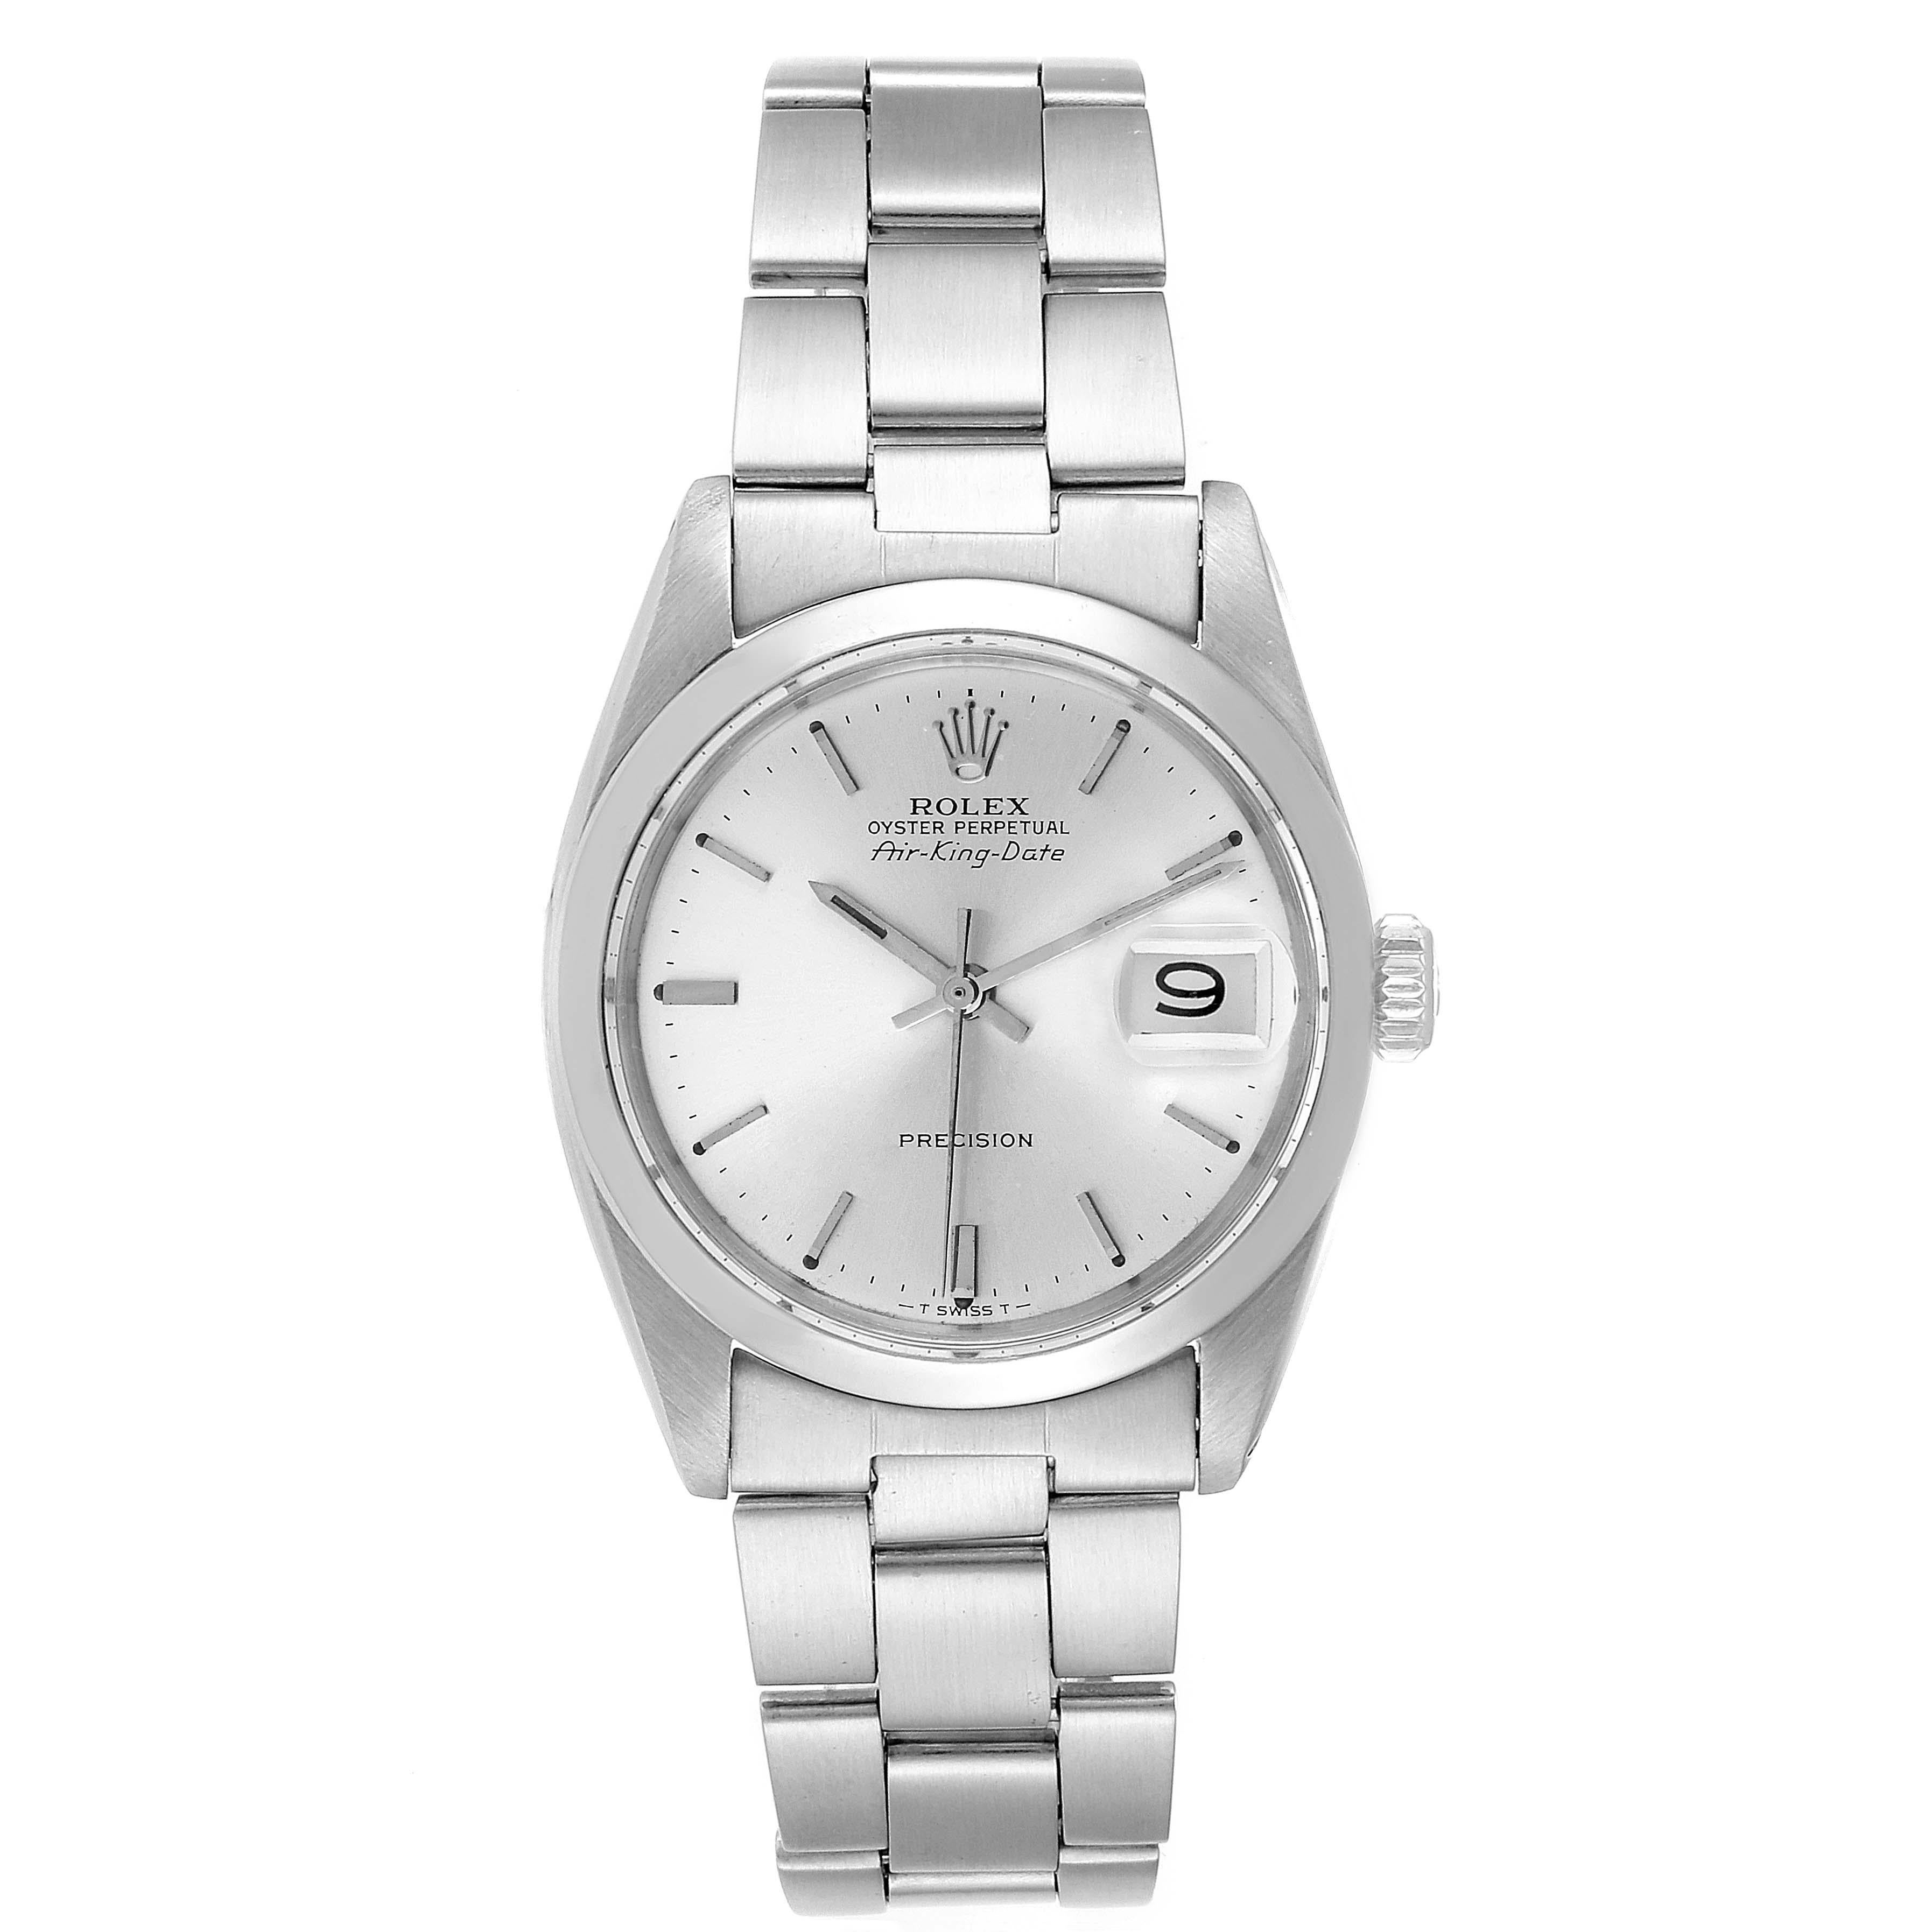 Rolex Air King Date Vintage Stainless Steel Silver Dial Mens Watch 5700. Officially certified chronometer self-winding movement. Stainless steel case 34.0 mm in diameter.  Rolex logo on a crown. Stainless steel smooth bezel. Scratch resistant